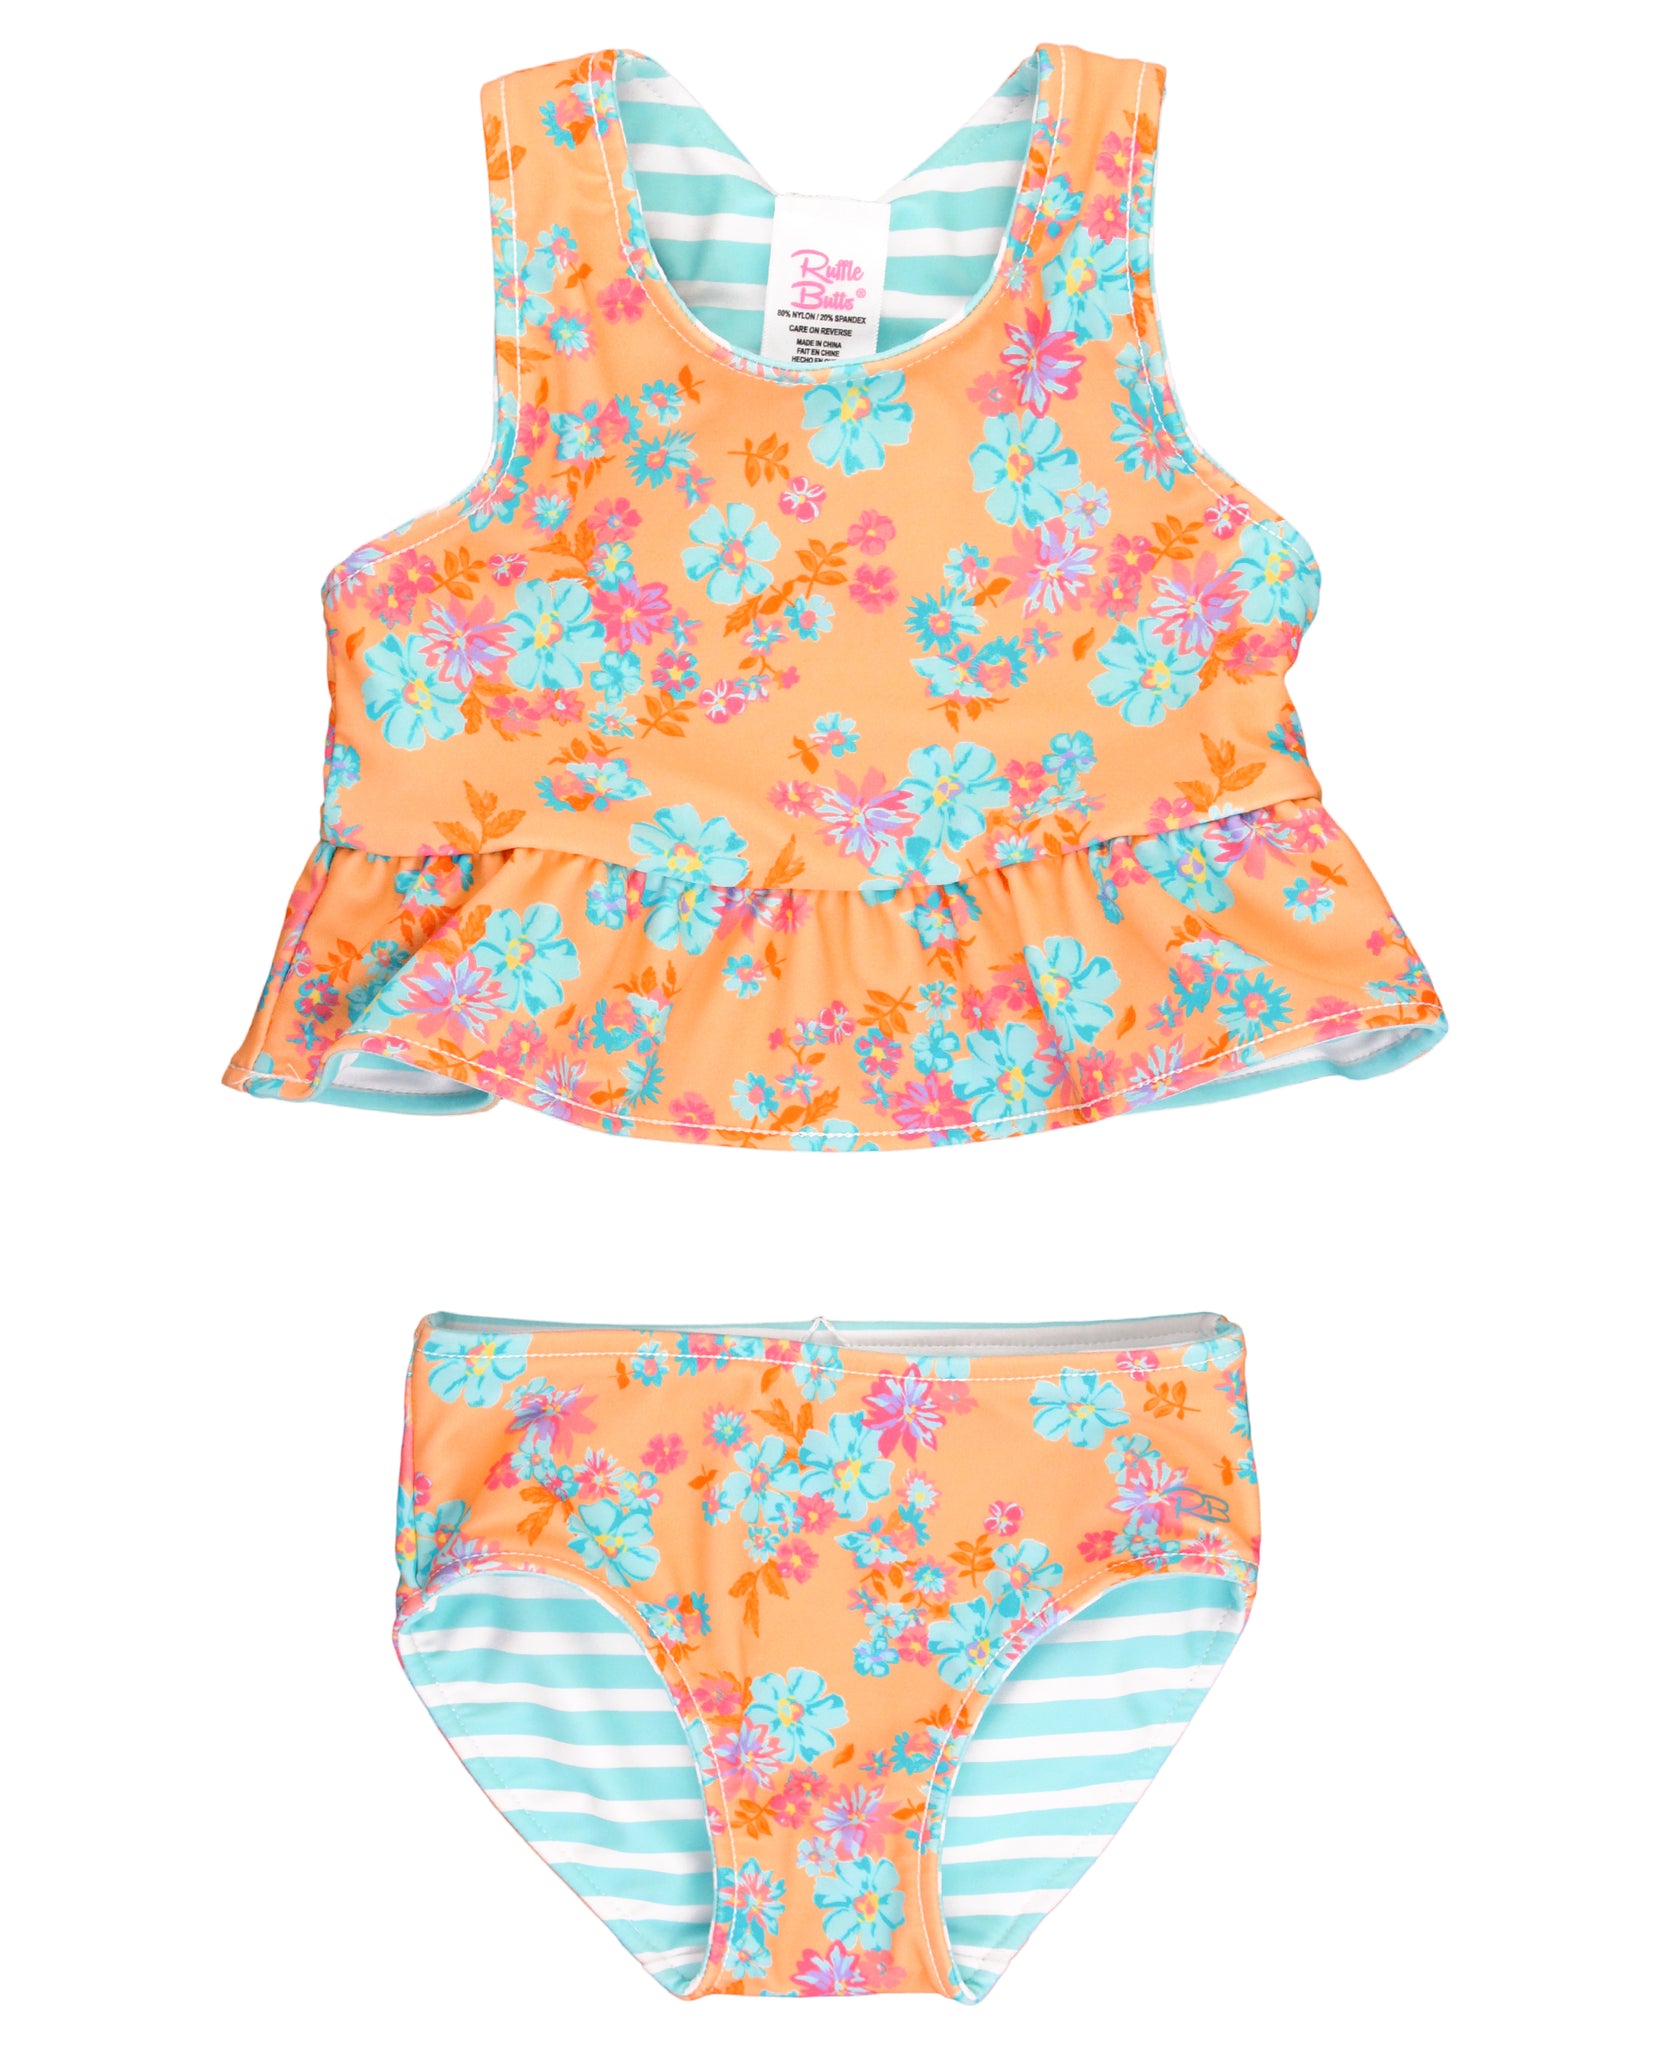 vibrant orange and blue floral reversible tankini.  Floral on one side and blue stripe on the other